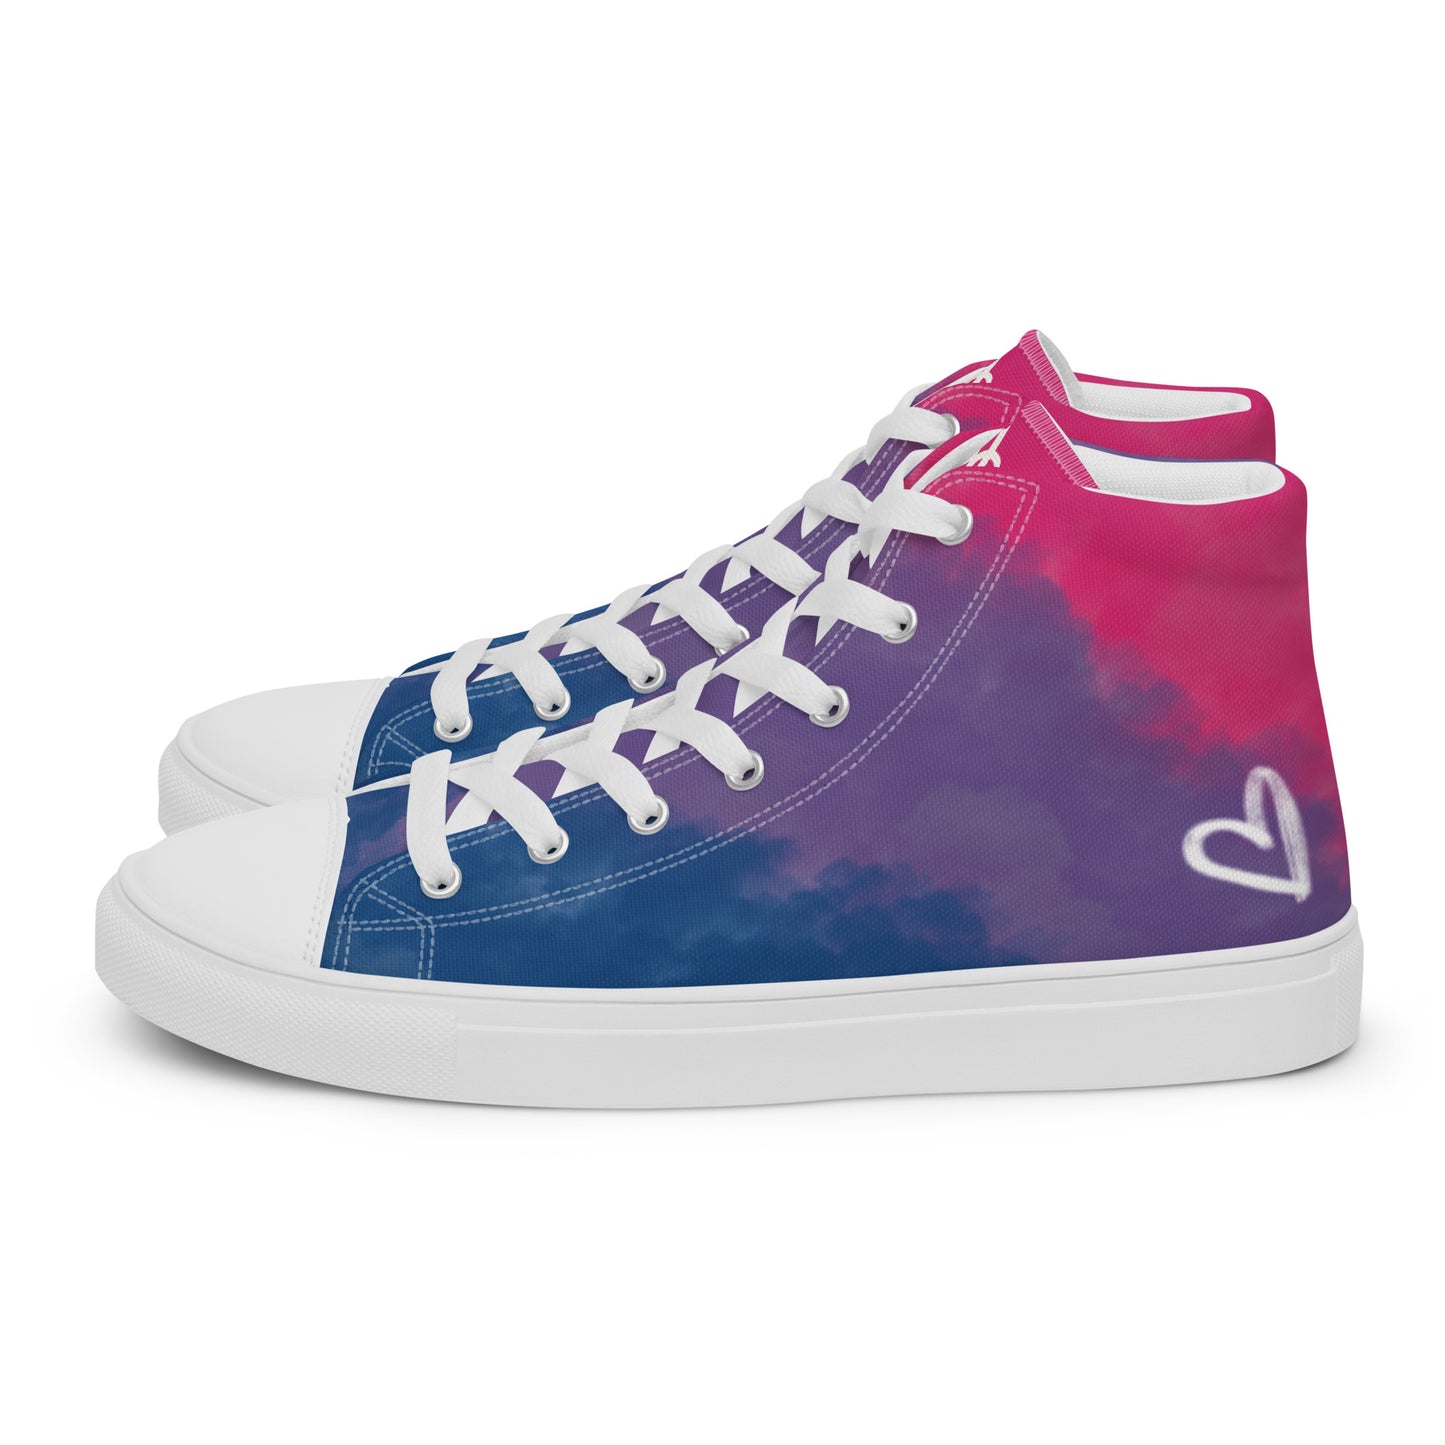 Left view: a pair of high top shoes with color block pink, purple, and blue clouds, a white hand drawn heart, and the Aras Sivad logo on the back.